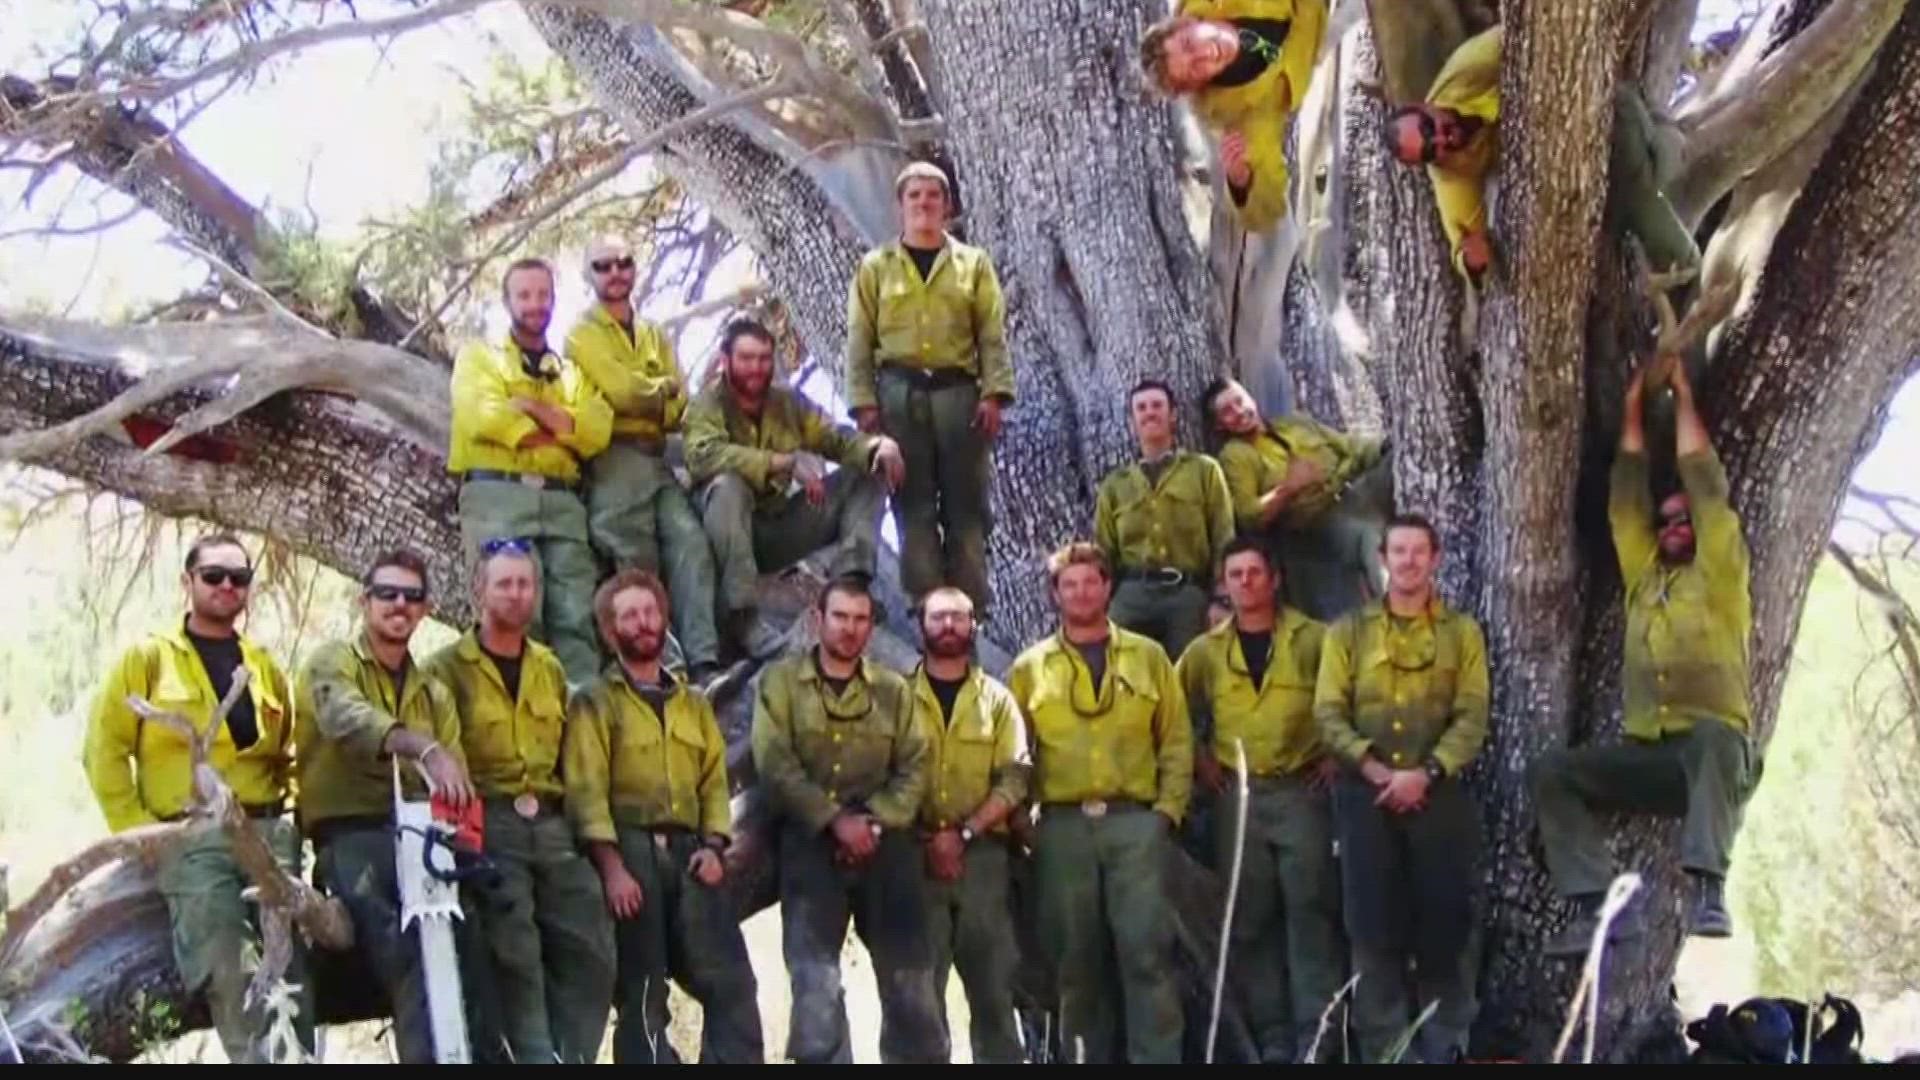 Flags across Arizona are flying at half-staff to honor the live of the 19 Granite Mountain hotshots who died nine years ago on Yarnell Hill. Here's a look back.